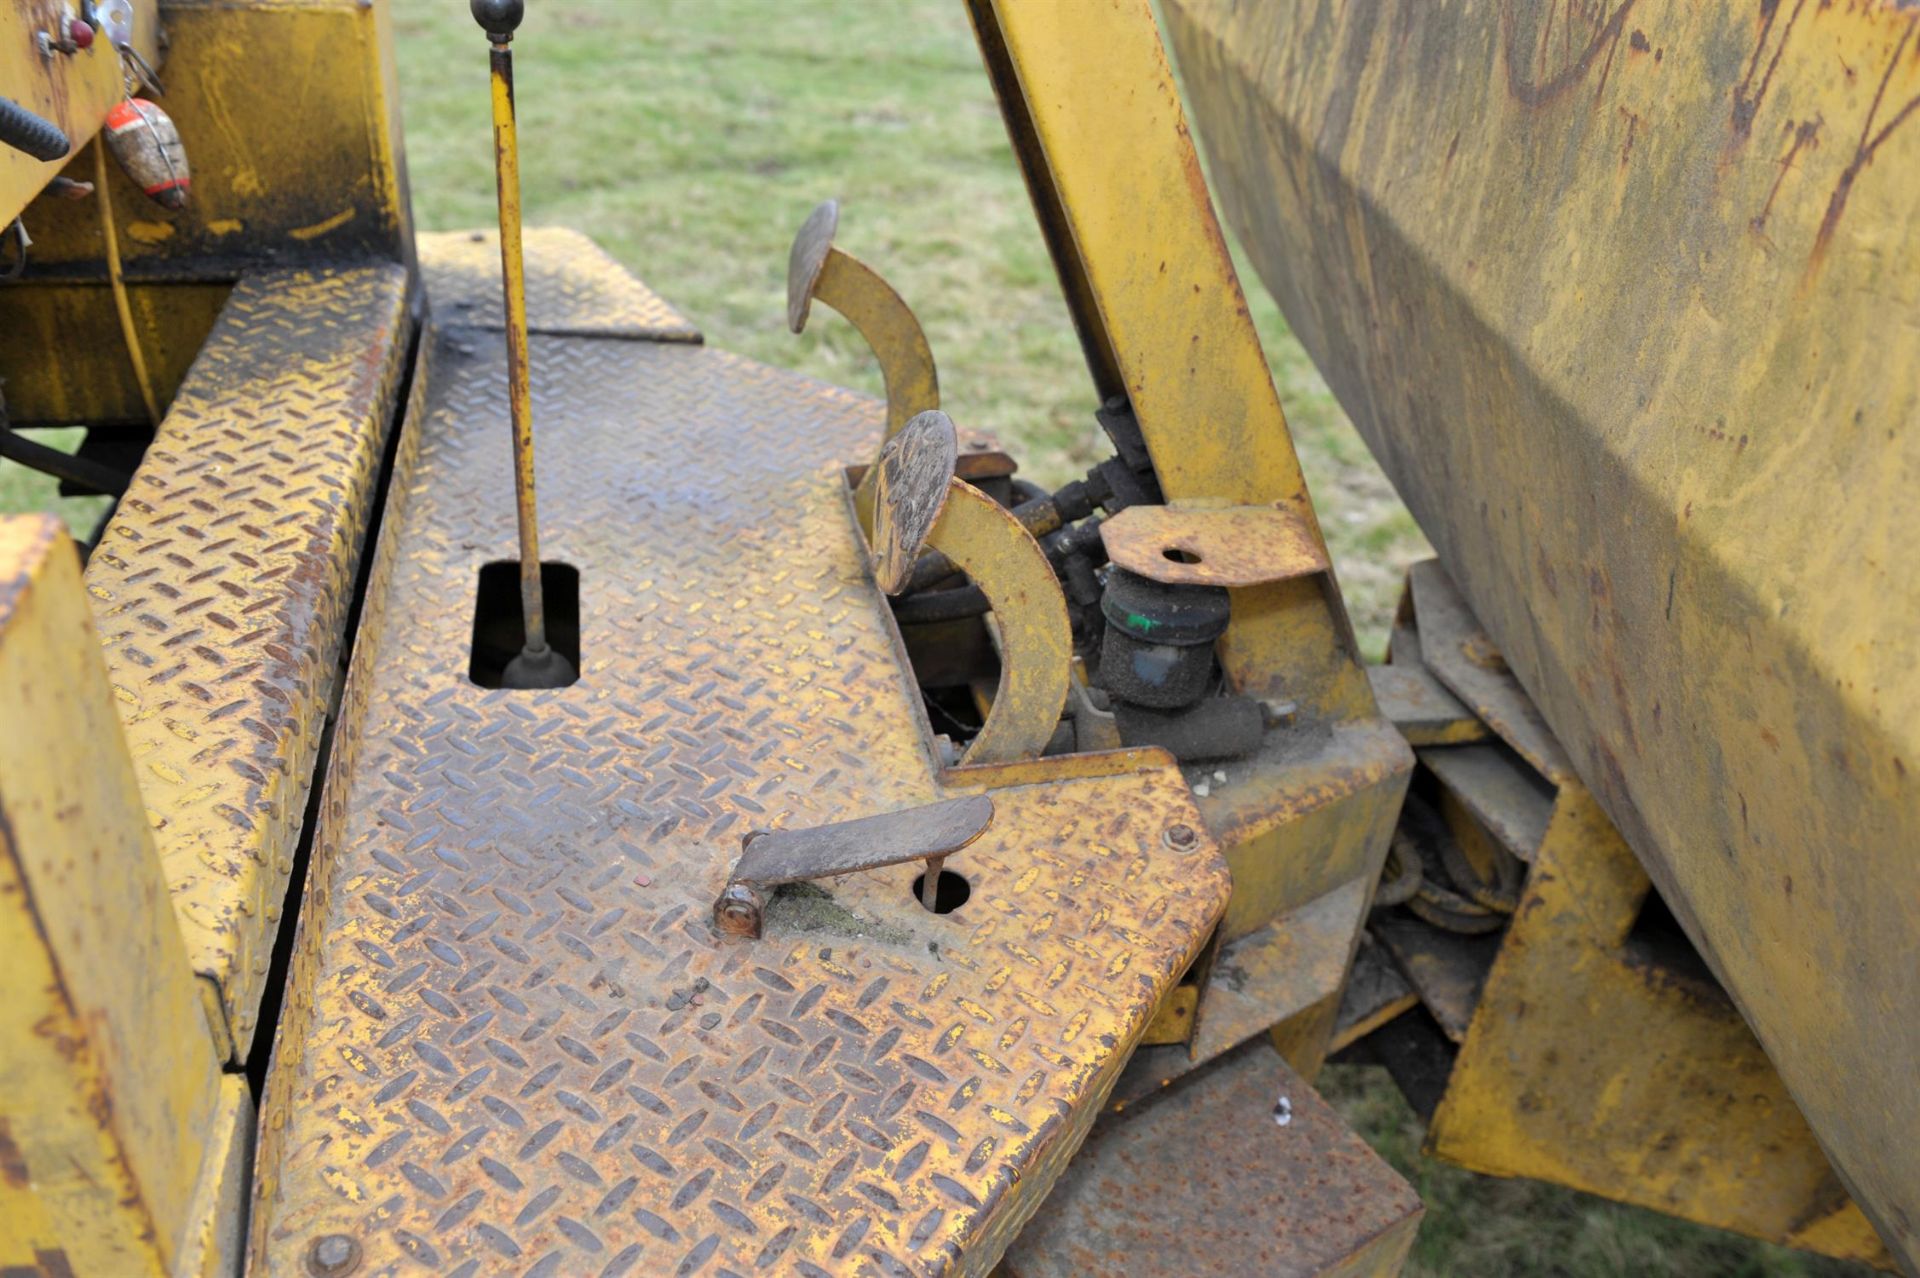 Two Tonne Thawites Dumper Truck. Electric key start. Tipper working. To satisfy your knowledge of - Image 7 of 10